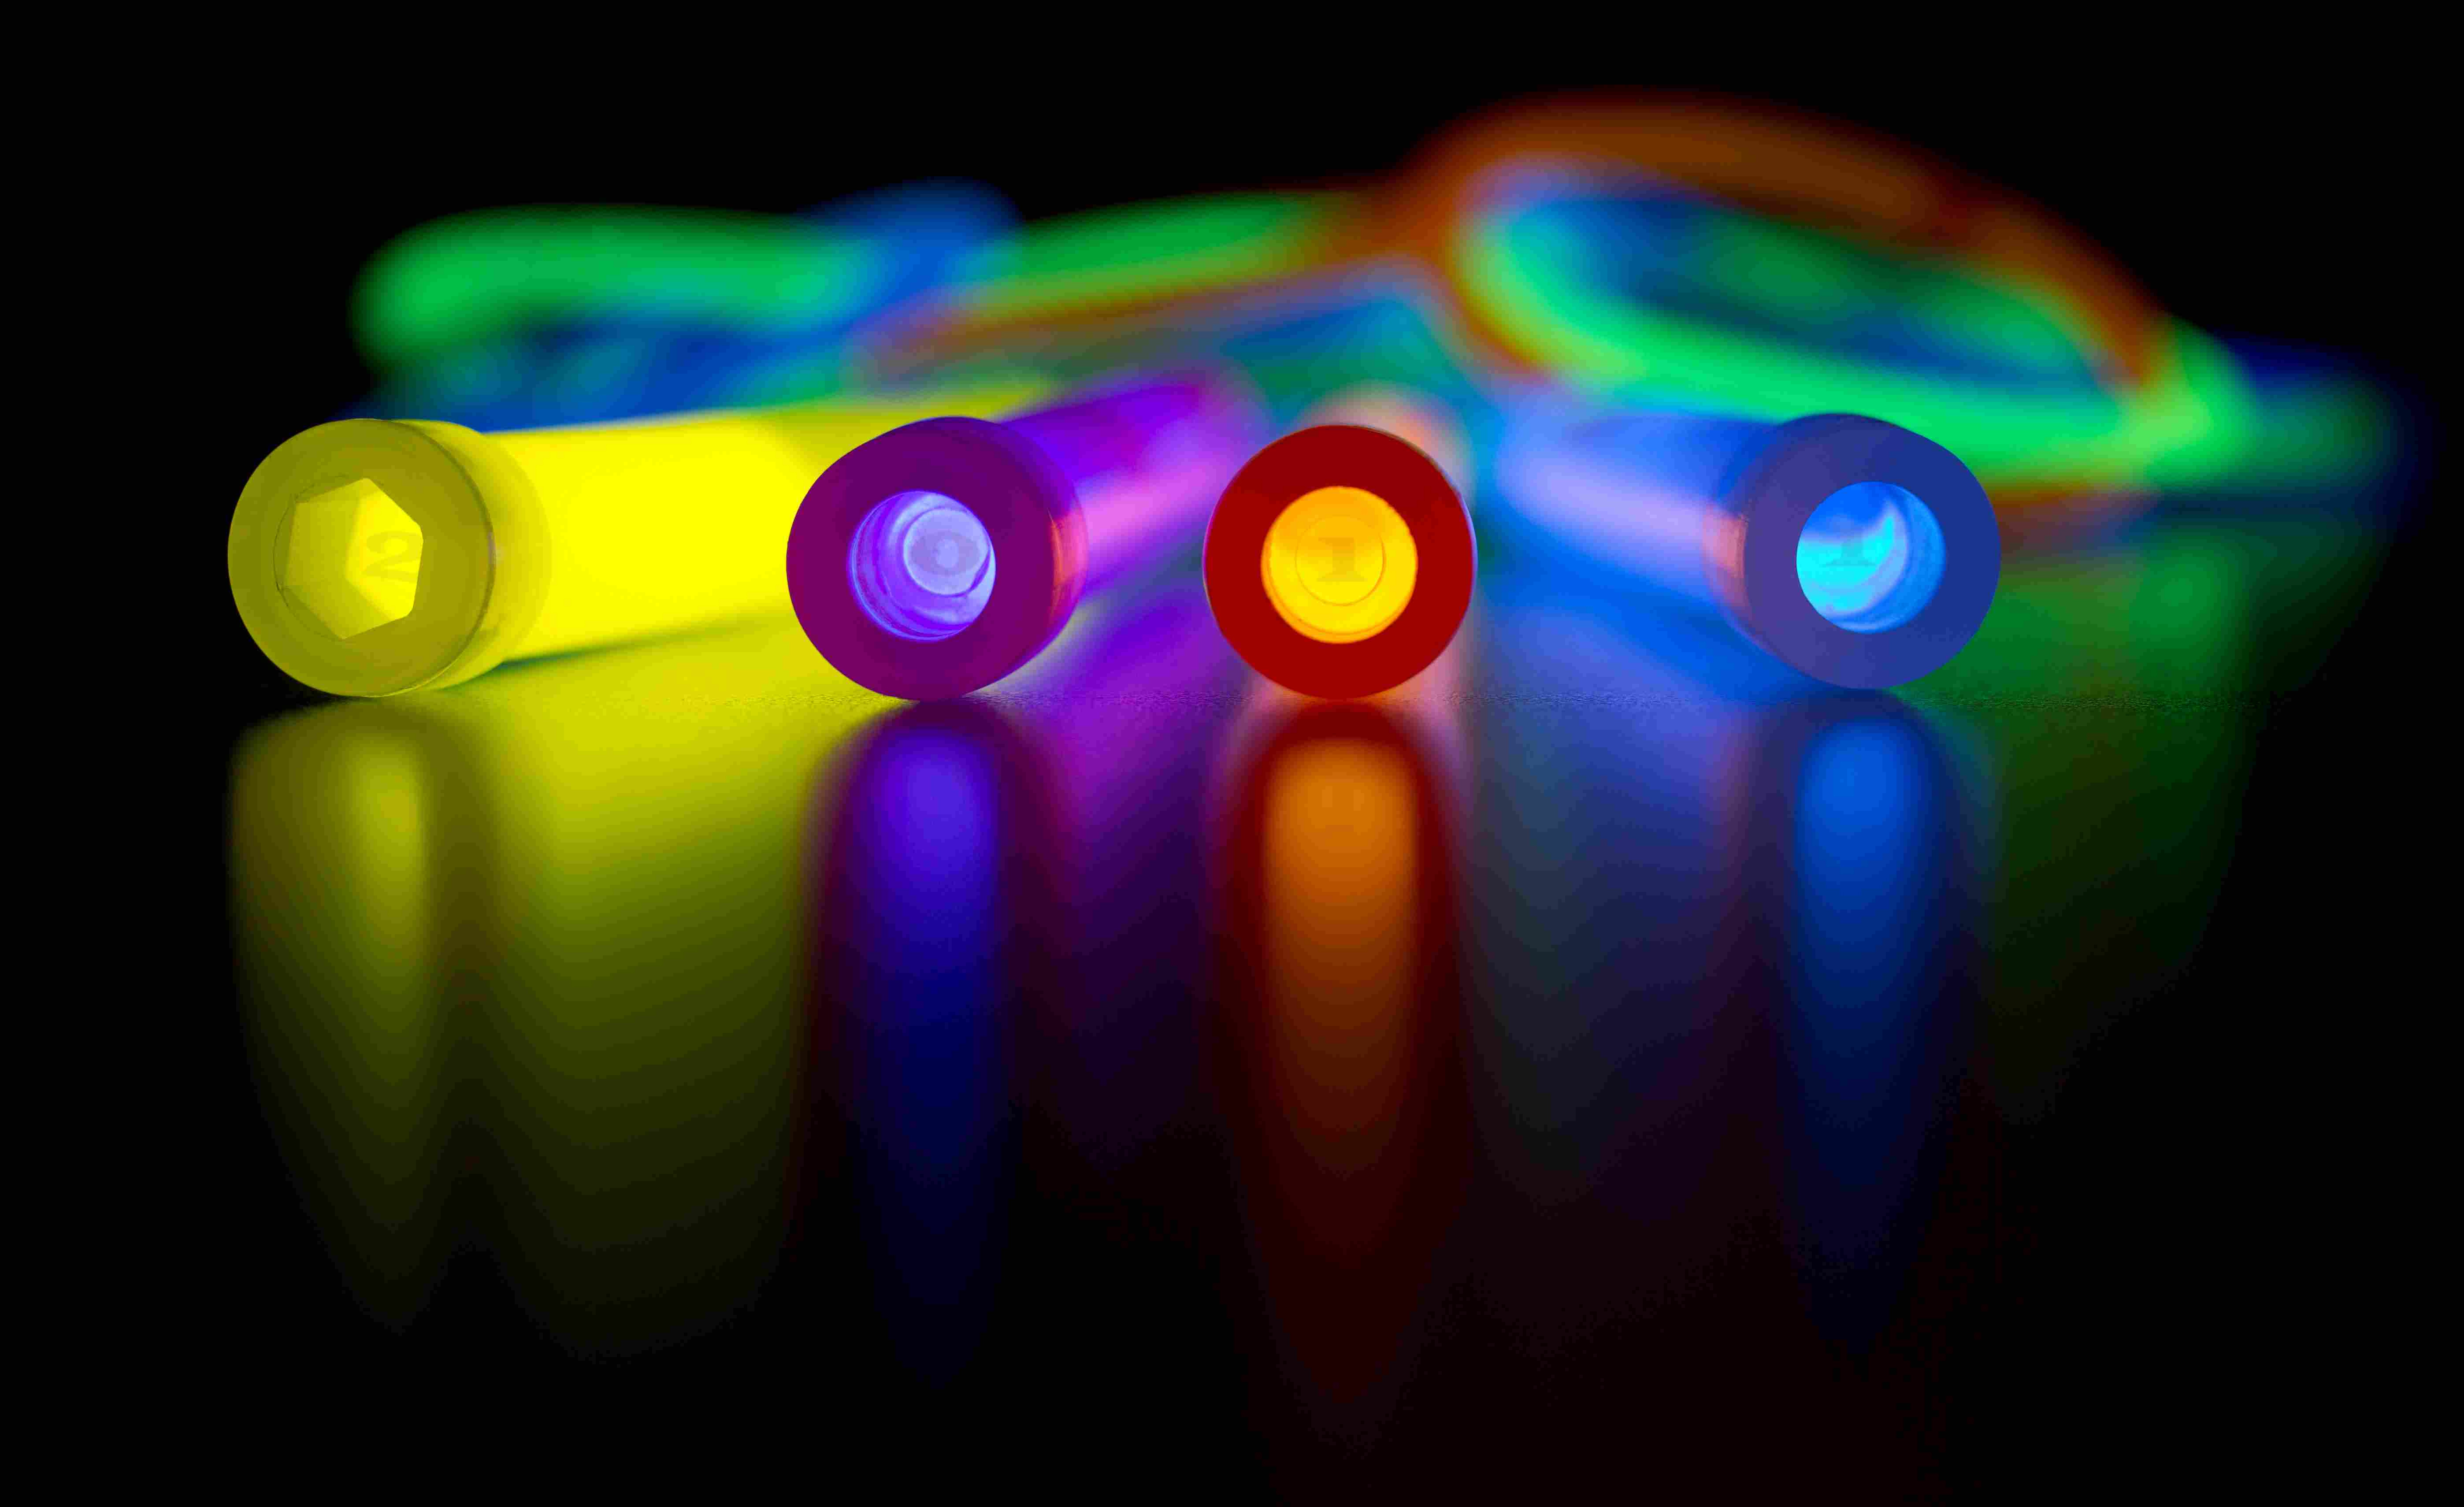 light up sticks in vase of how glow stick colors work in glow sticks get their colors from fluorescent dyes